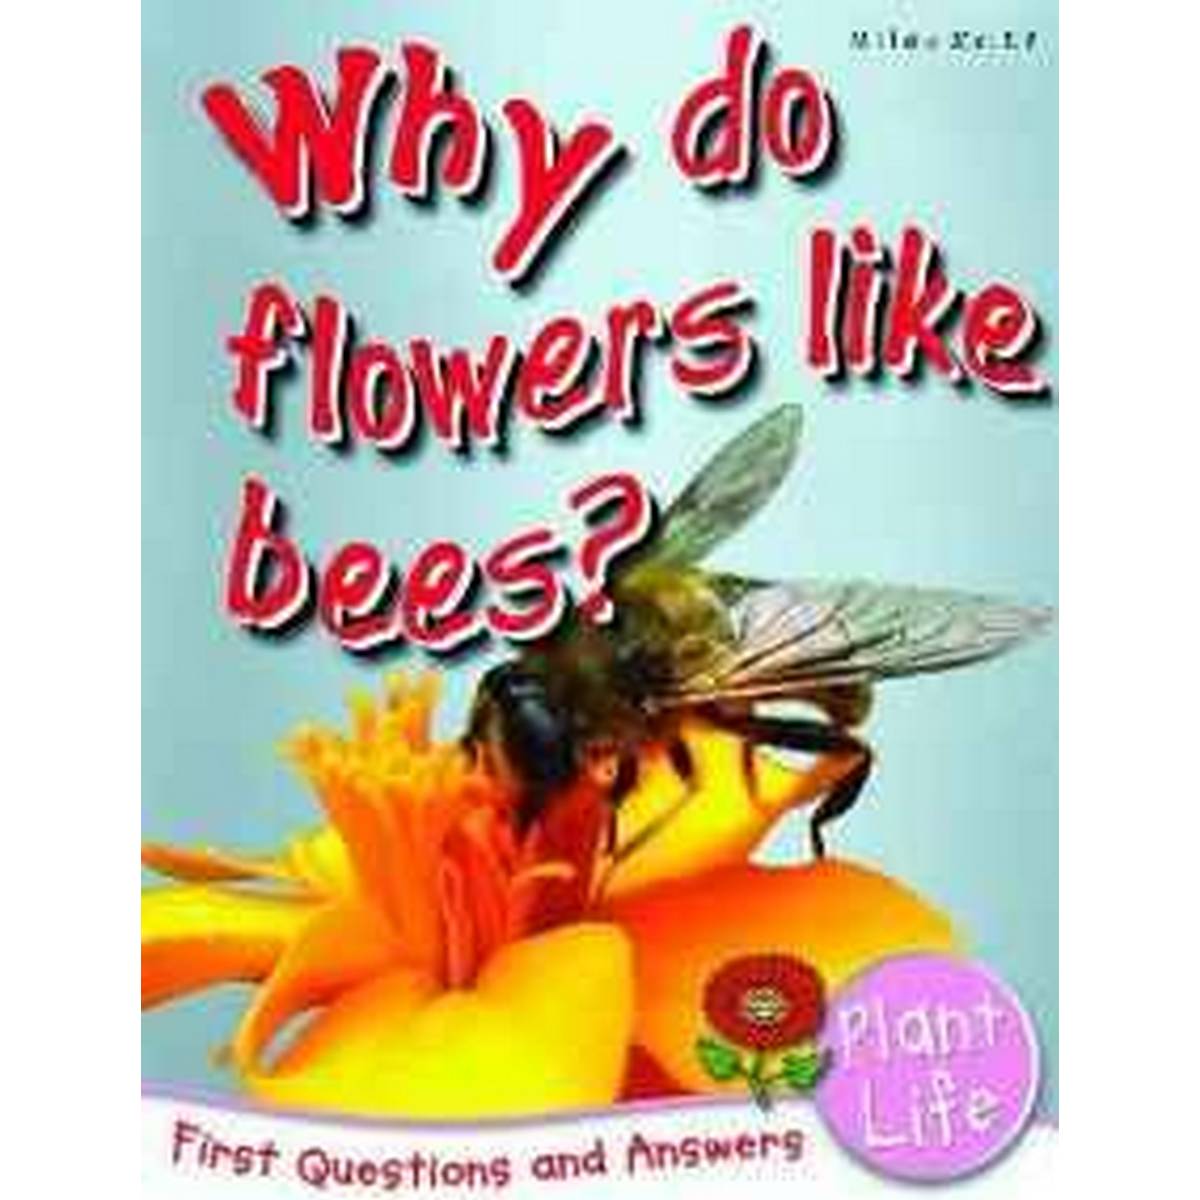 Plant Life: Why Do Flowers Like Bees? (First Questions and Answers)